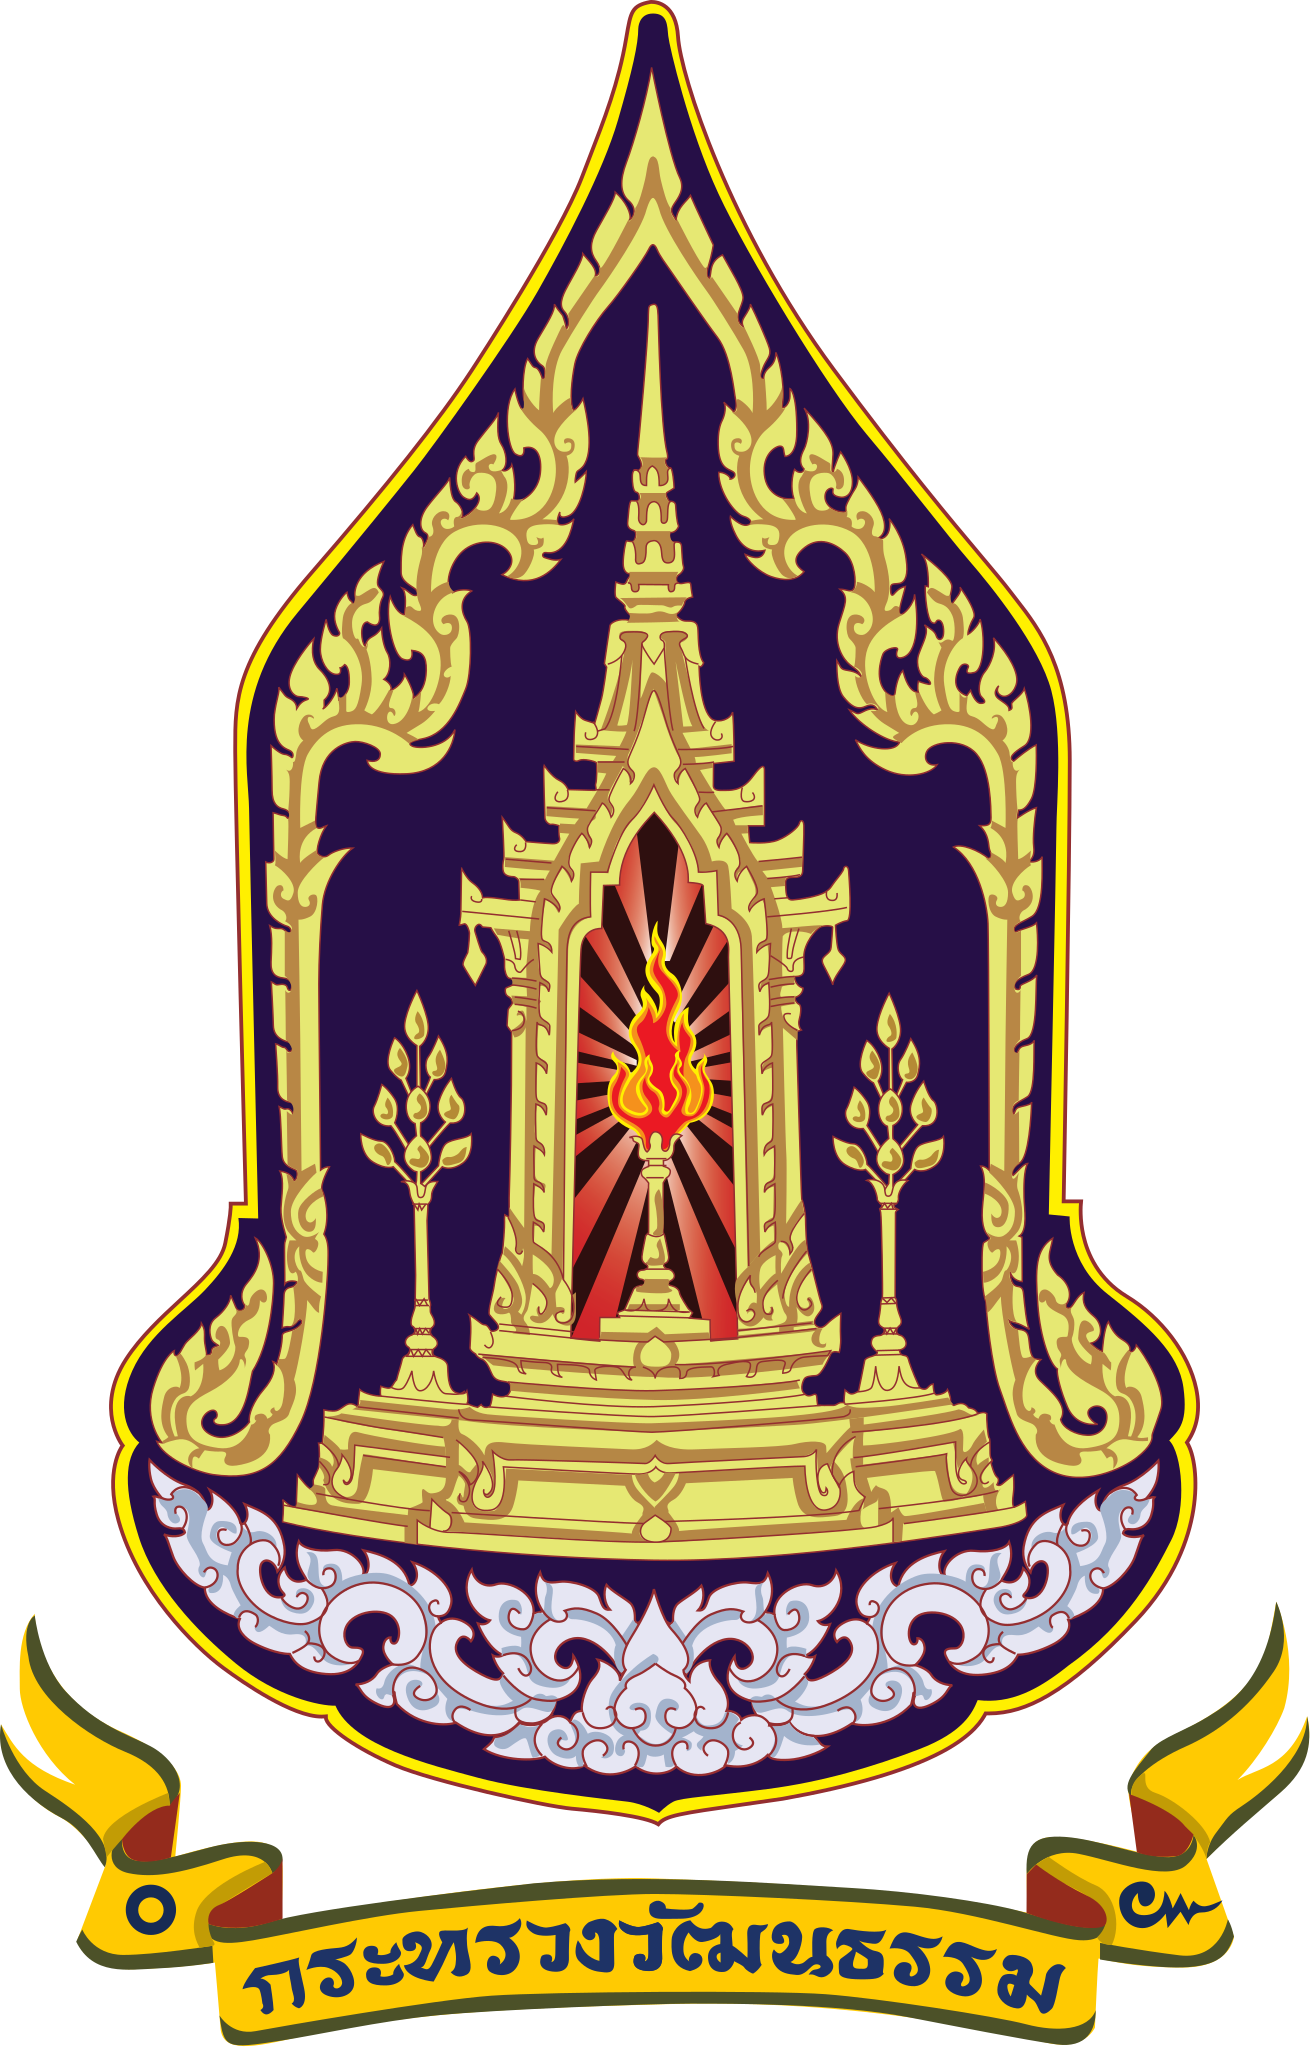 1310px-Seal_of_the_Ministry_of_Culture_of_Thailand.svg.png